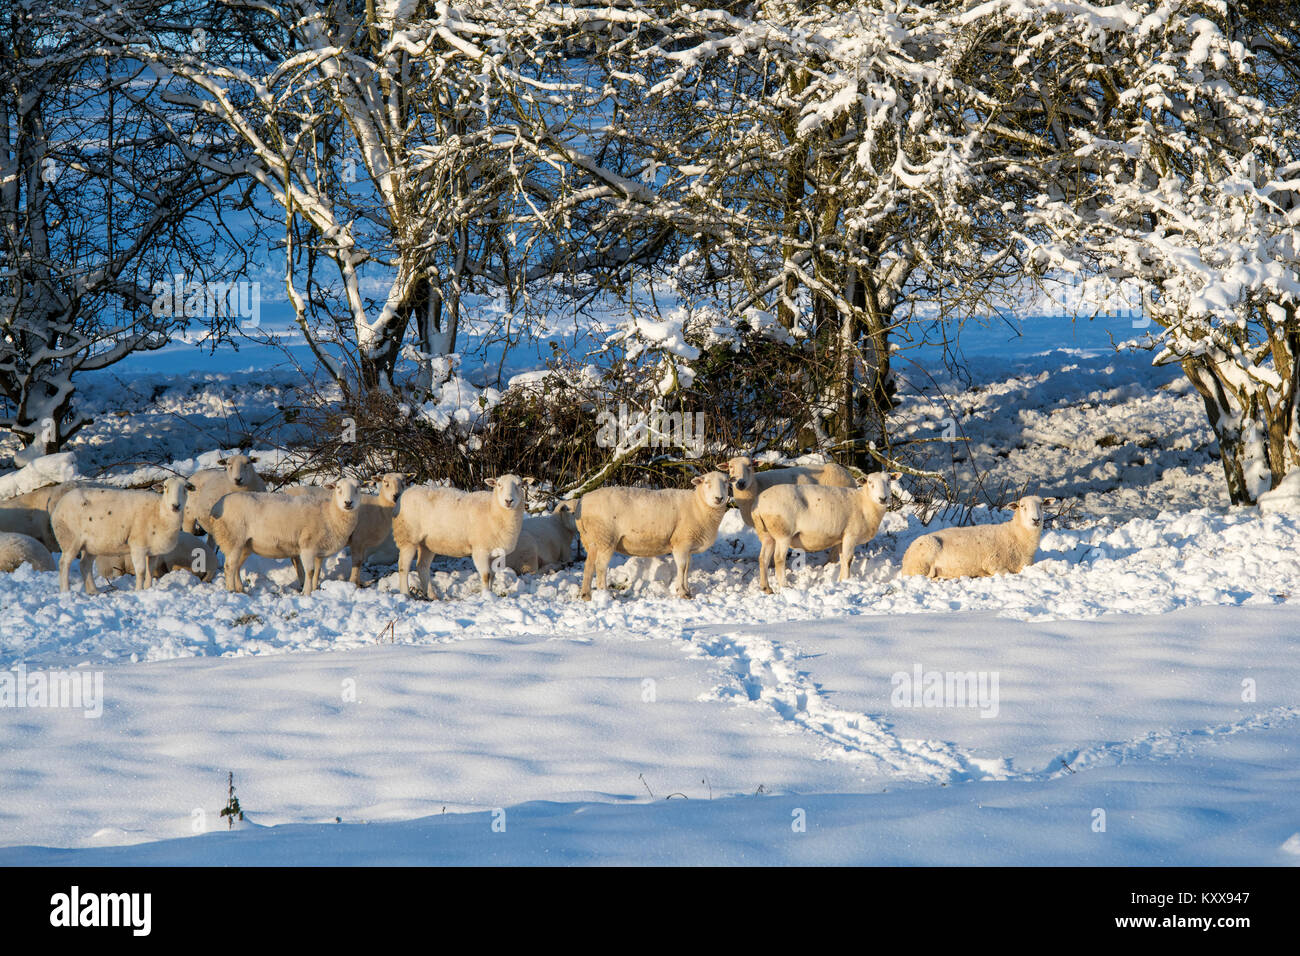 Sheep in the snow in December. Bourton on the Hill, Cotswolds, Gloucestershire, England Stock Photo